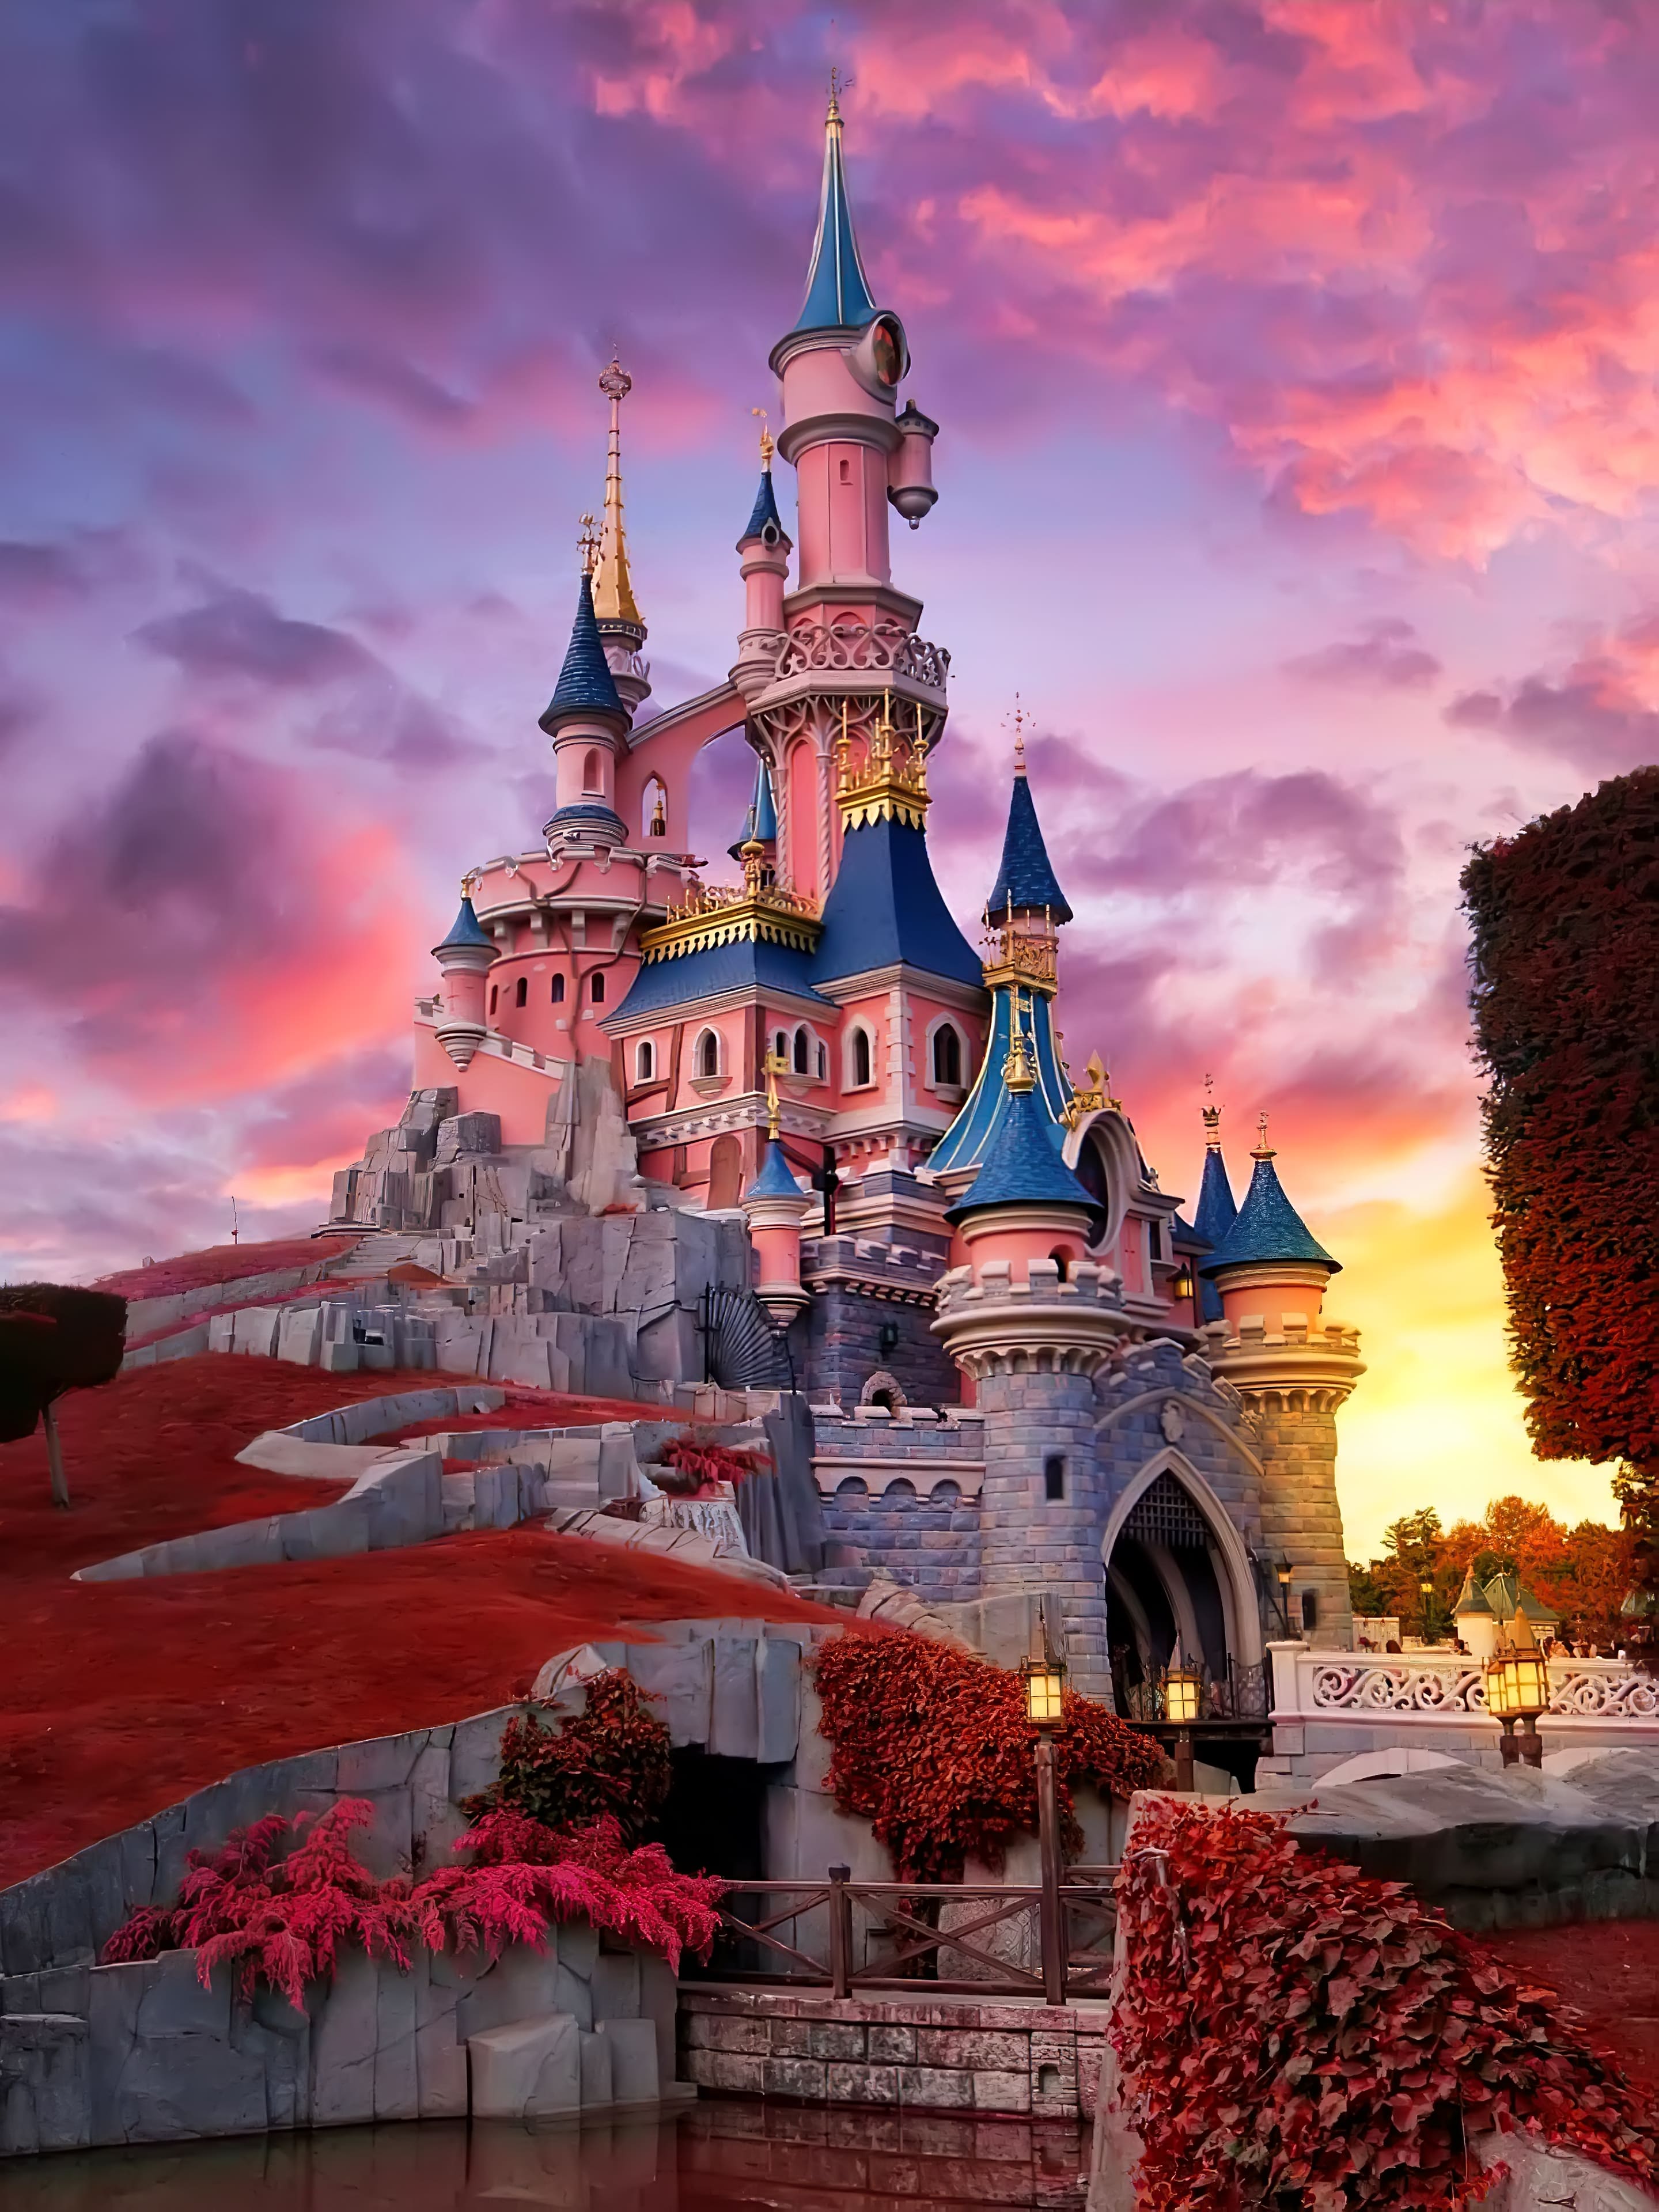 A pink castle with blue roofs on a hilltop, with a pink and blue sky in the background. - Disneyland